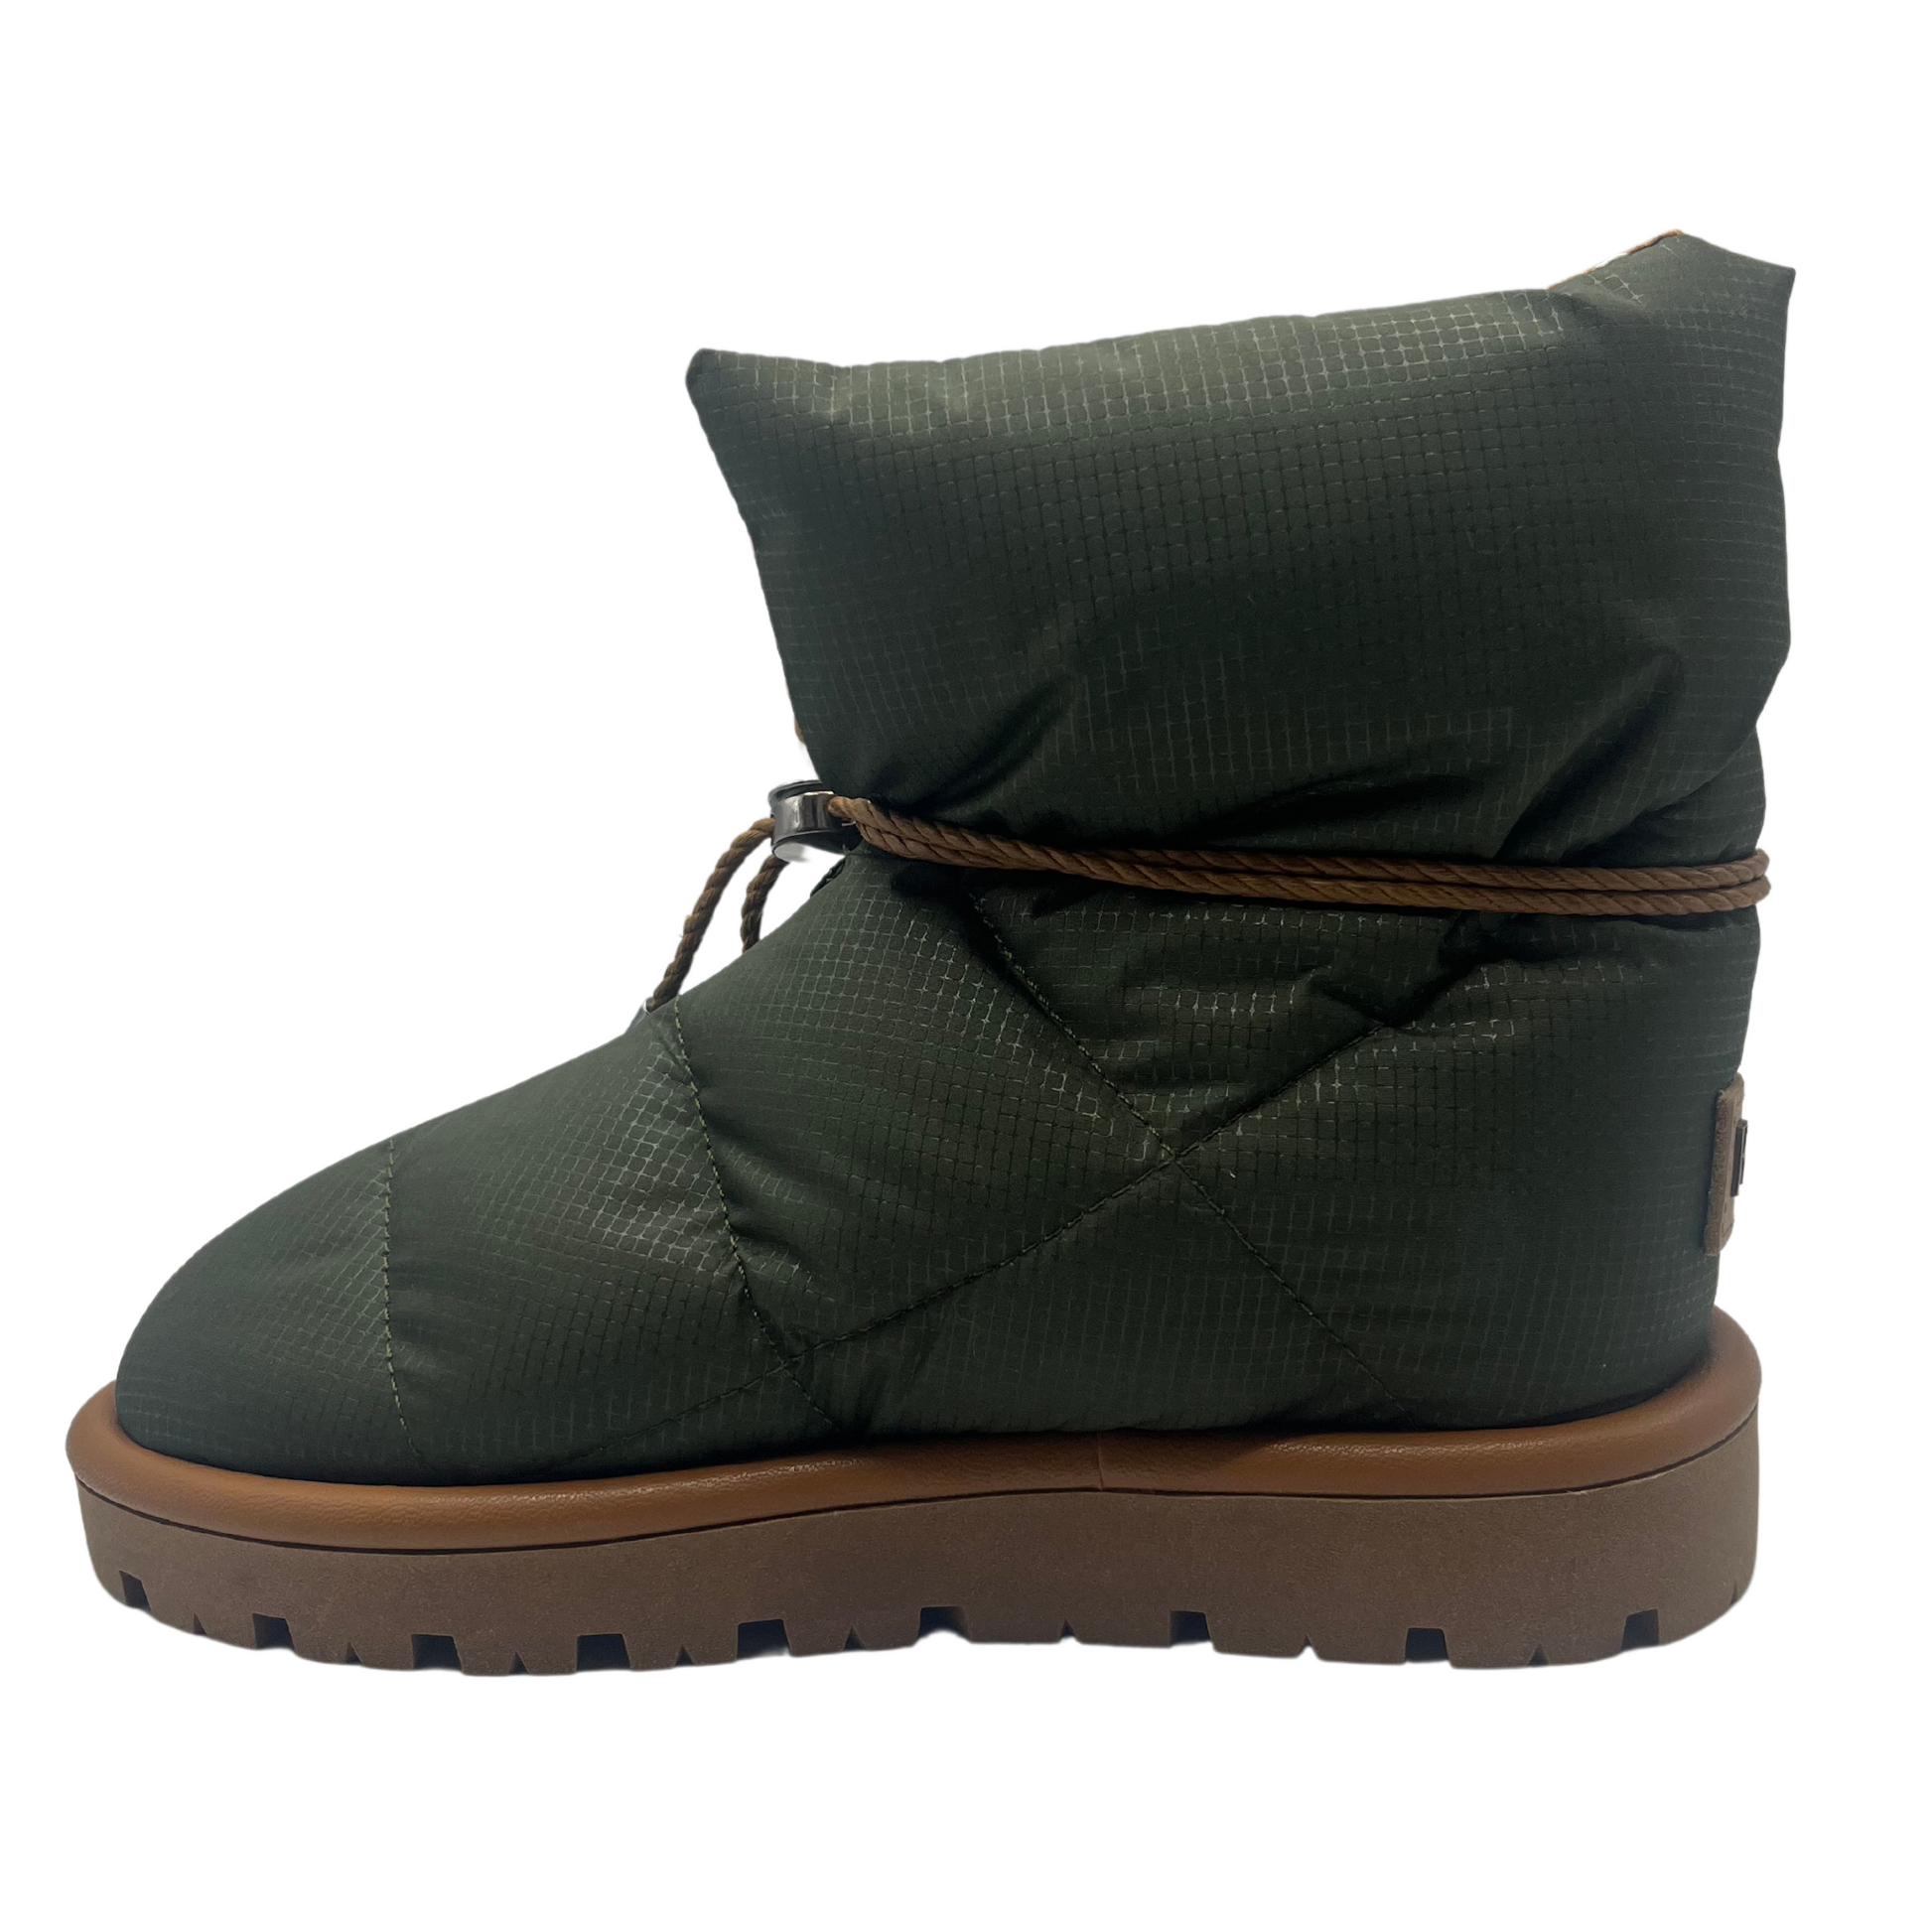 Left facing view of khaki coloured puffer boot with brown rubber outsole